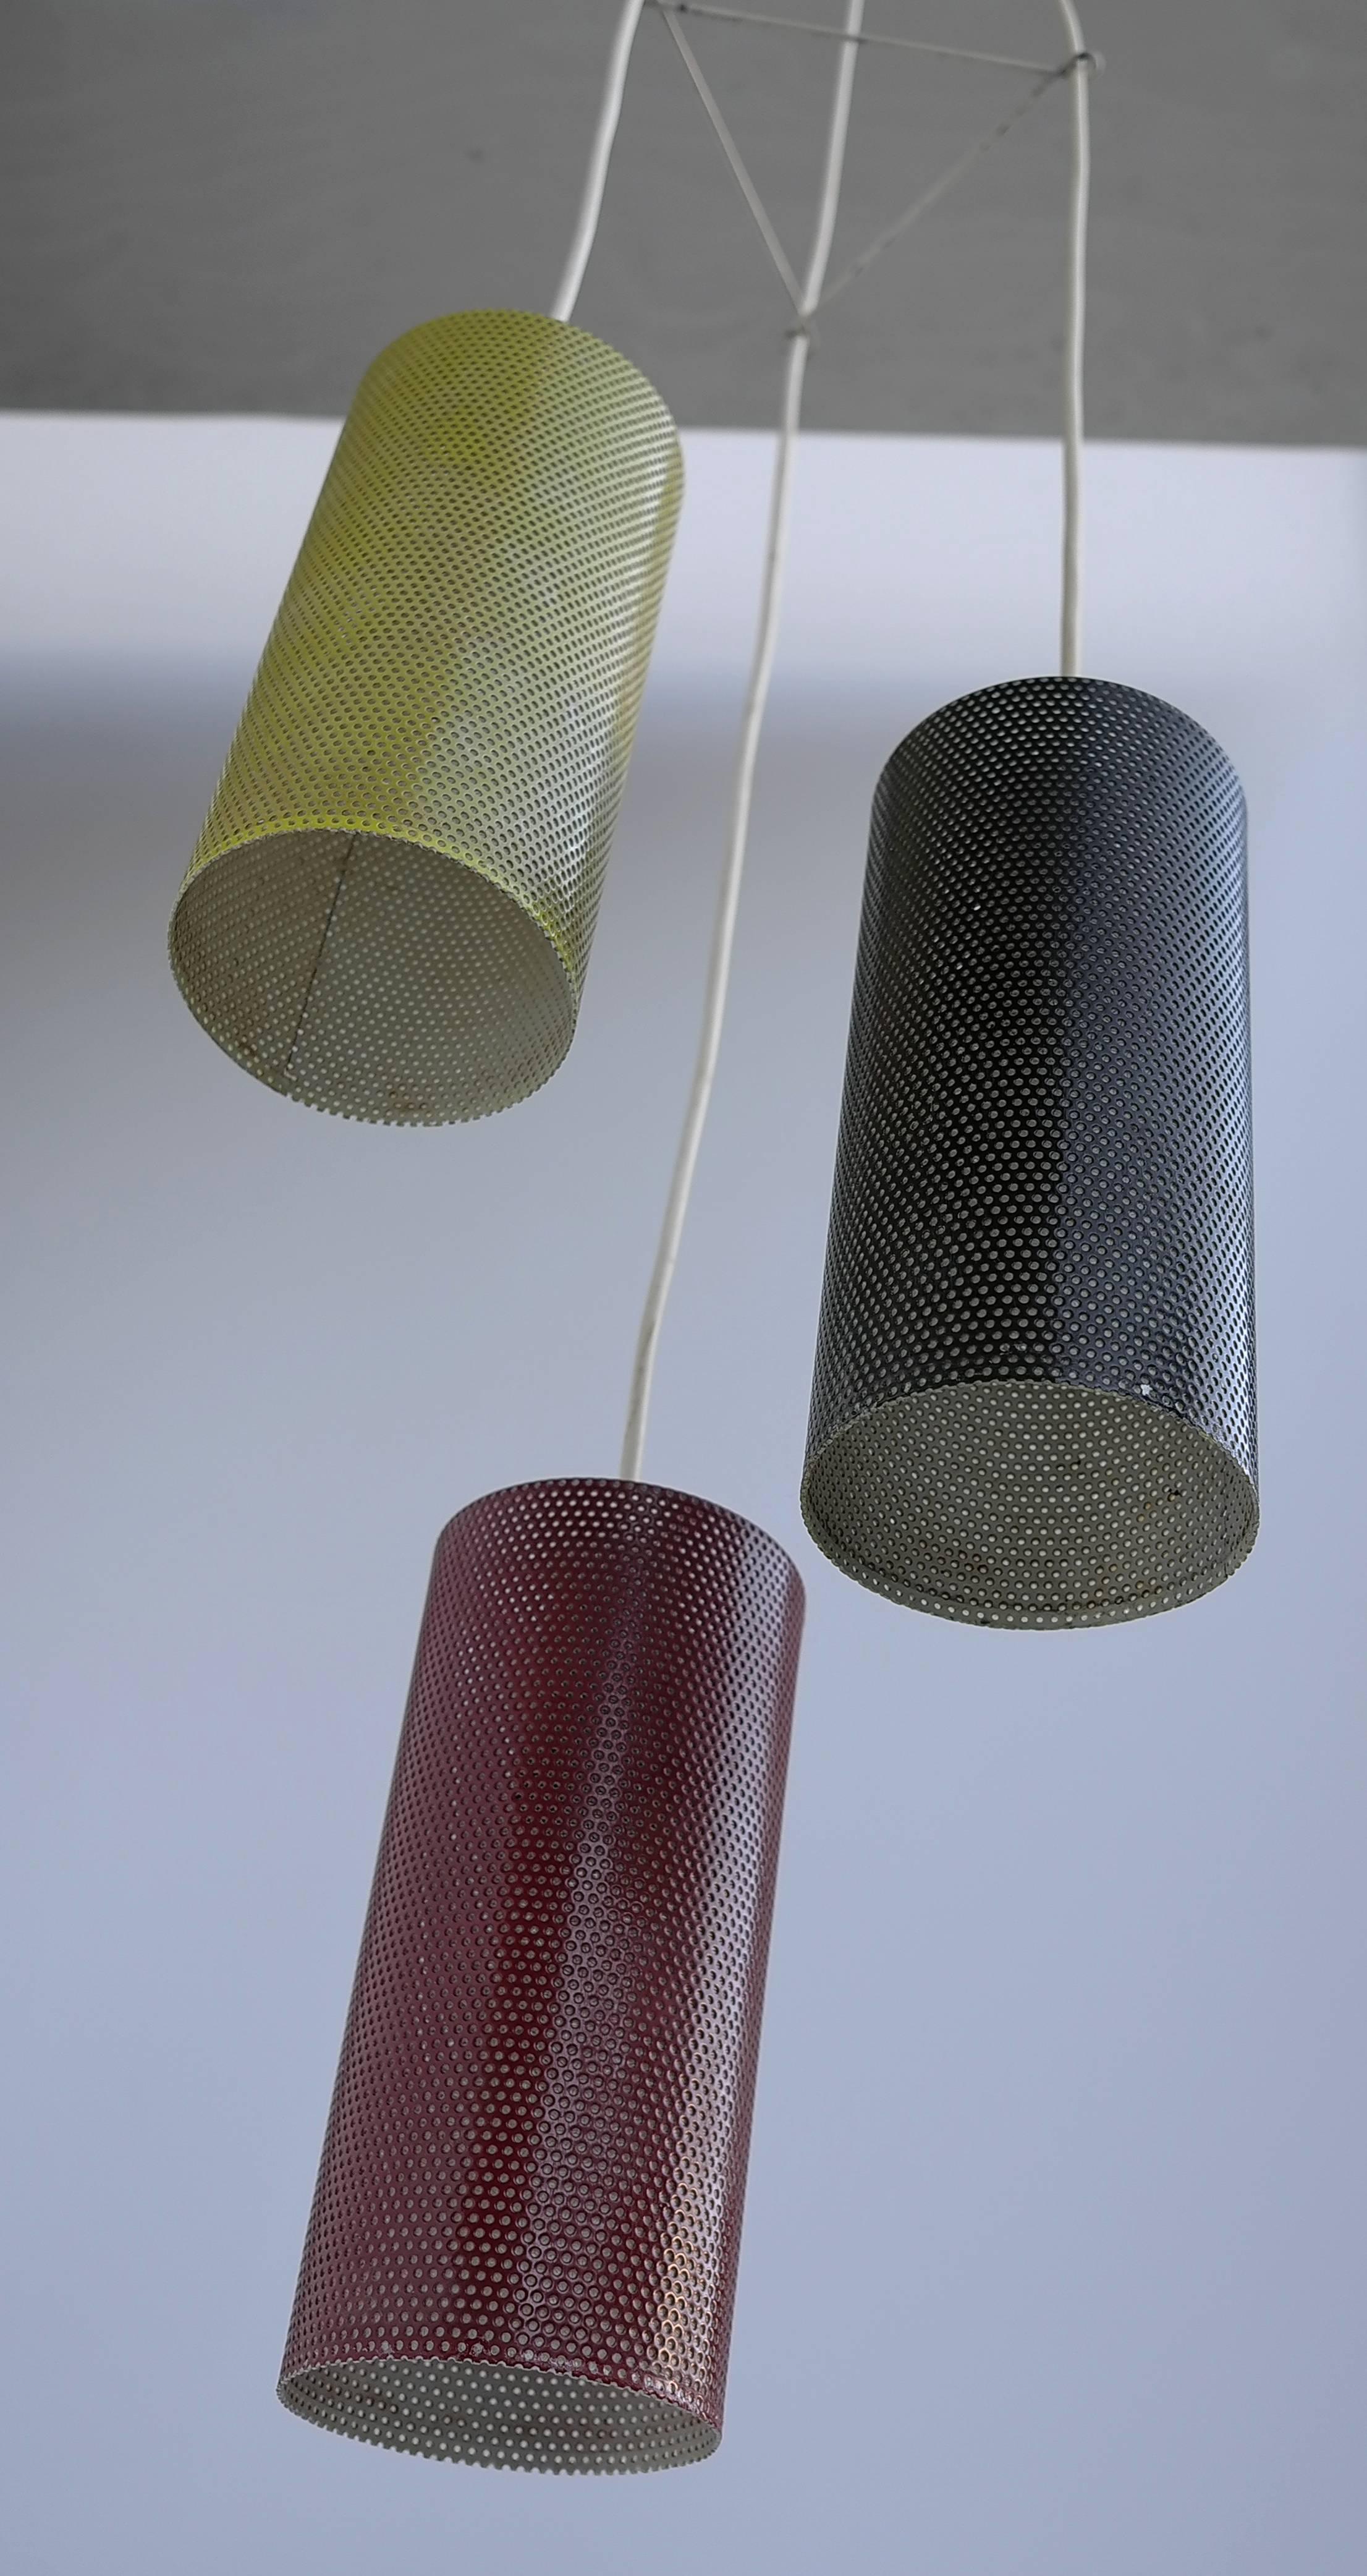 Colored metal pendant in style of Mathieu Matégot. Yellow, black and red metal perforated shades.

Measures: Height 133cm (adjustable) width 30 x 30cm, each shade: 23cm height, 10cm diameter.